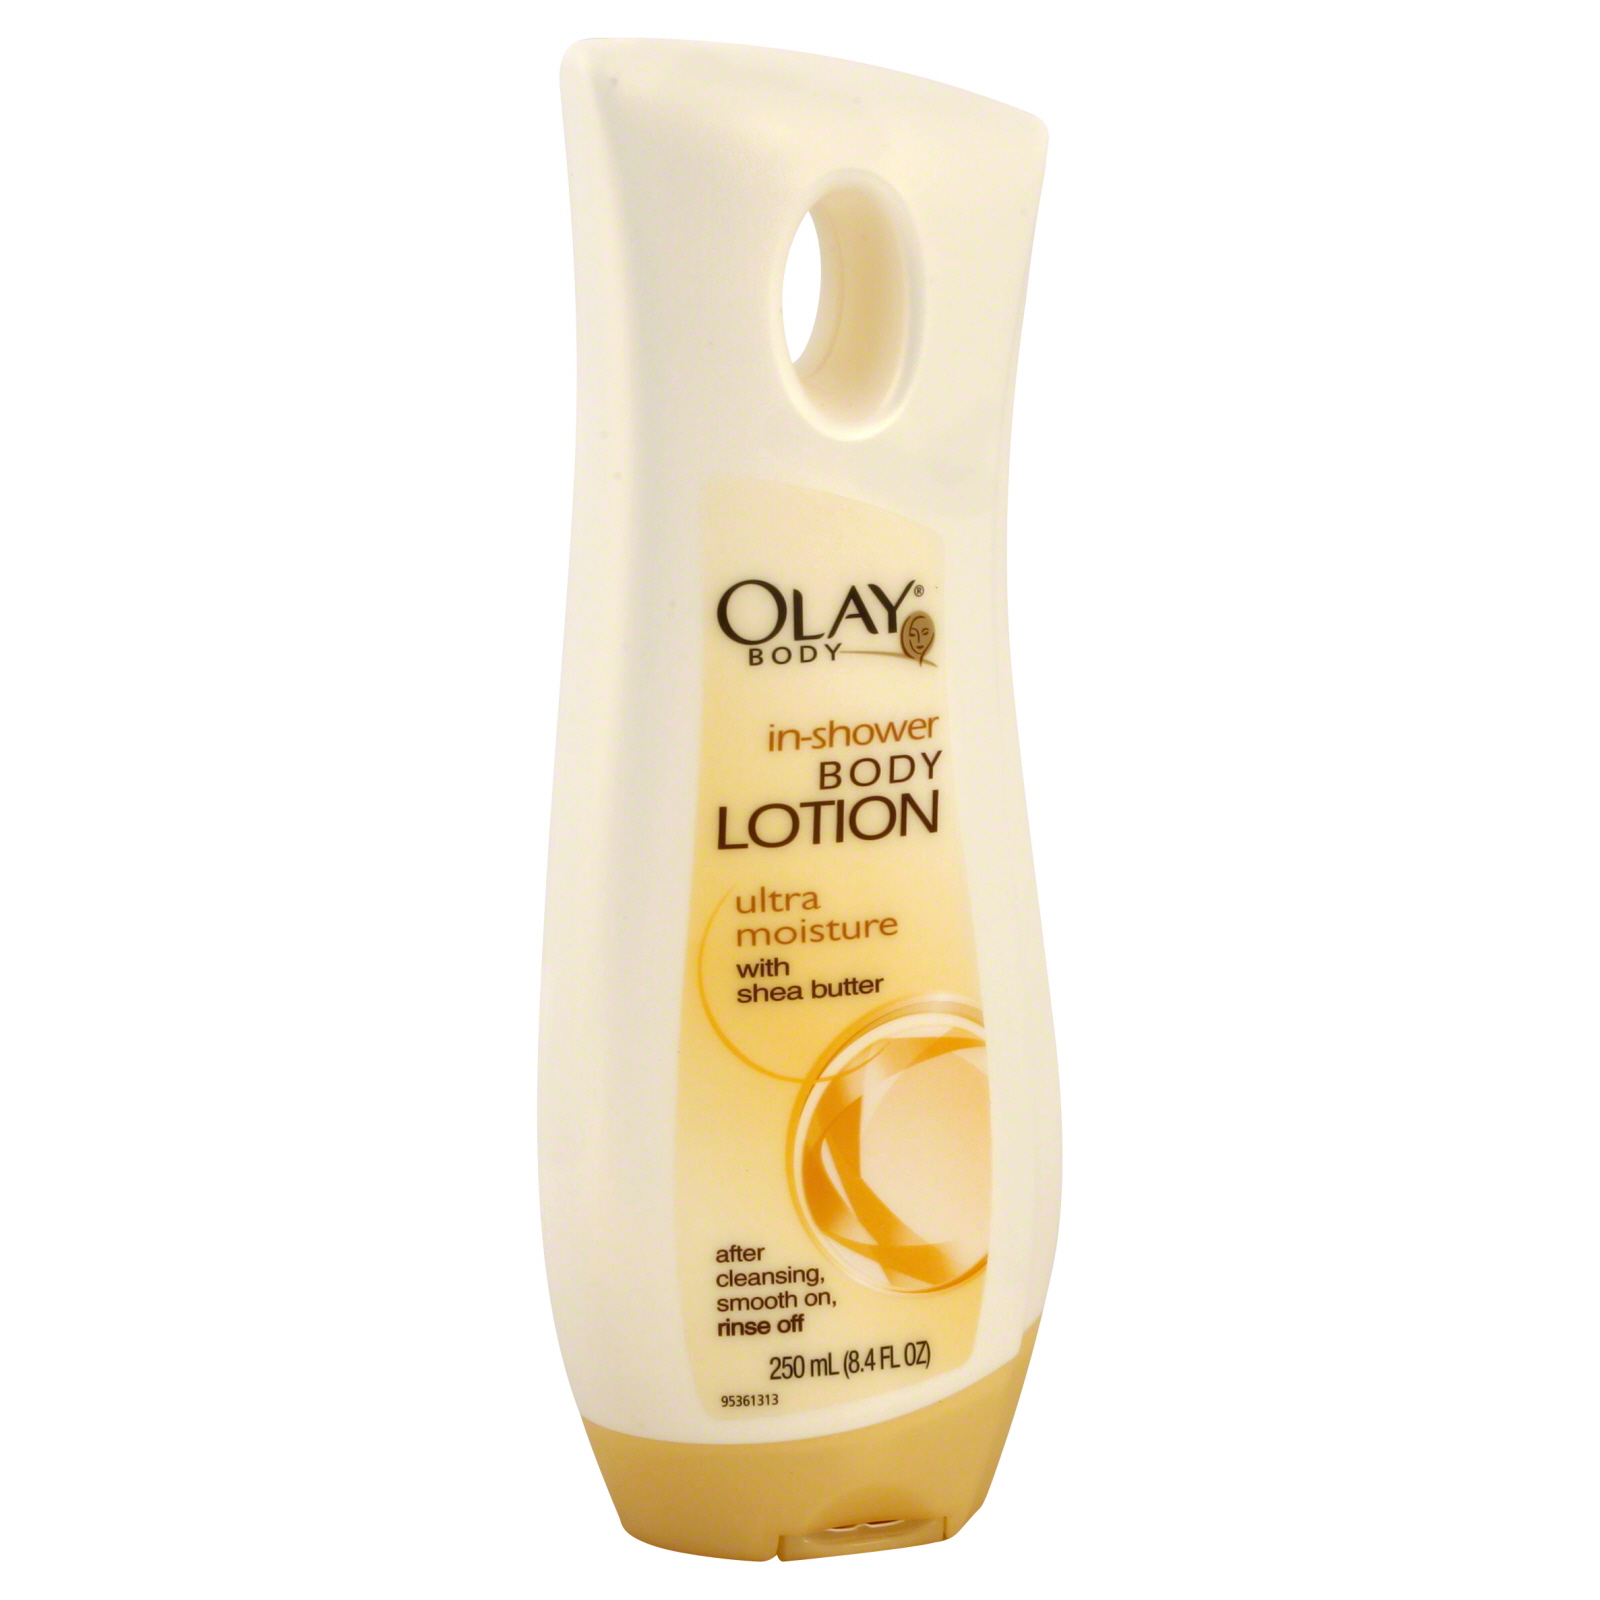 Olay Body Lotion, In-Shower, Ultra Moisture with Shea Butter, 8.4 oz.